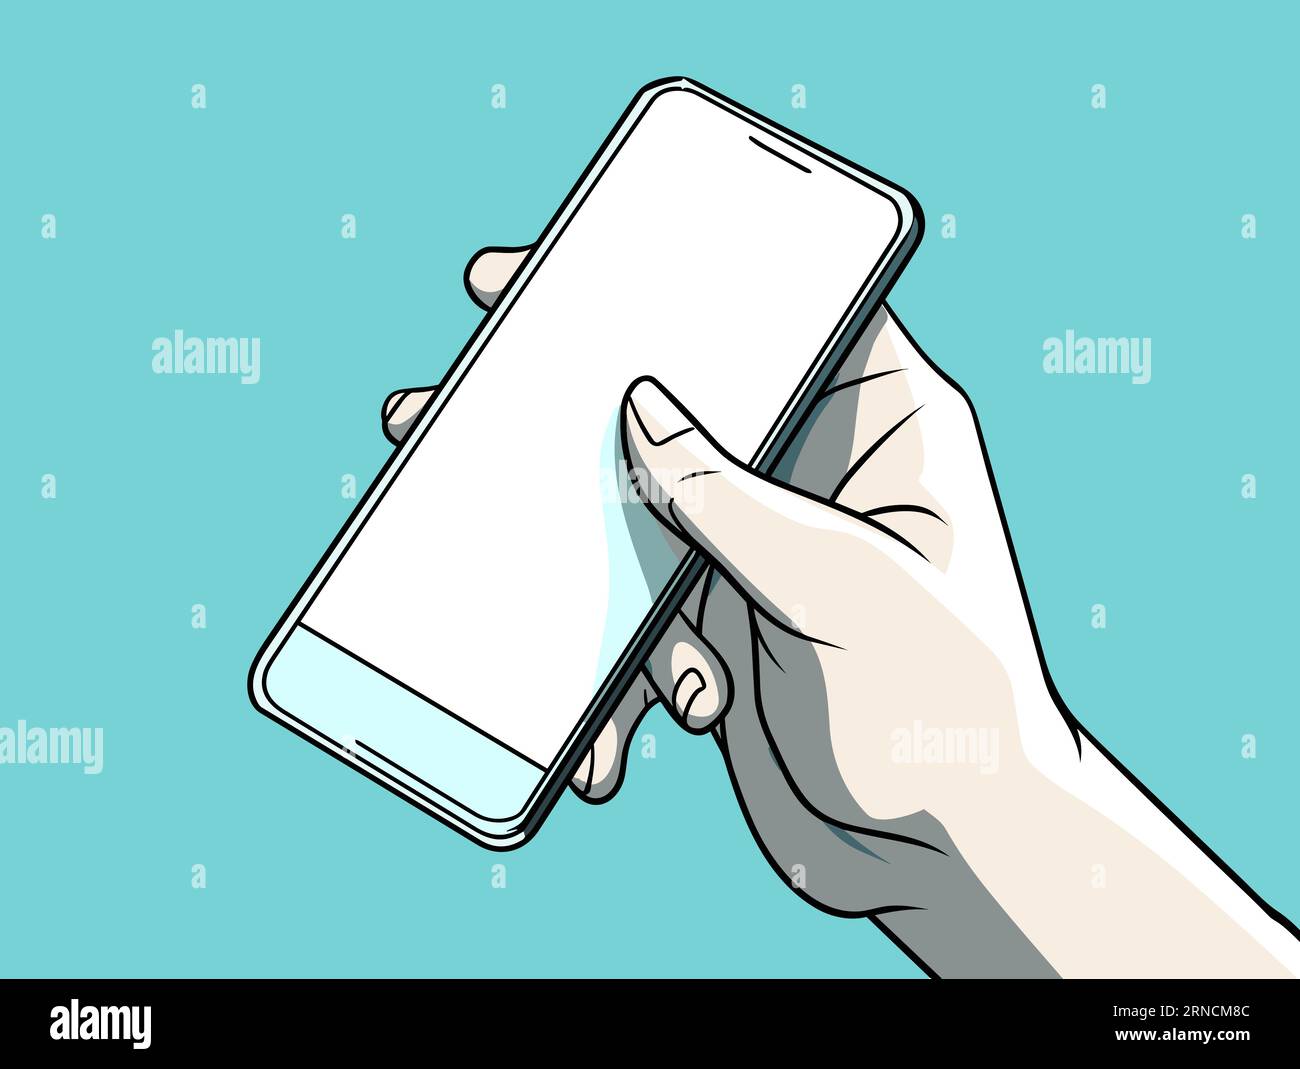 A Person Holding Up A Smartphone With A Blank Screen, In The Style Of Vintage Comic Style, Sky-Blue And Black, Smooth Surfaces, Fine Lines, Delicate C Stock Vector